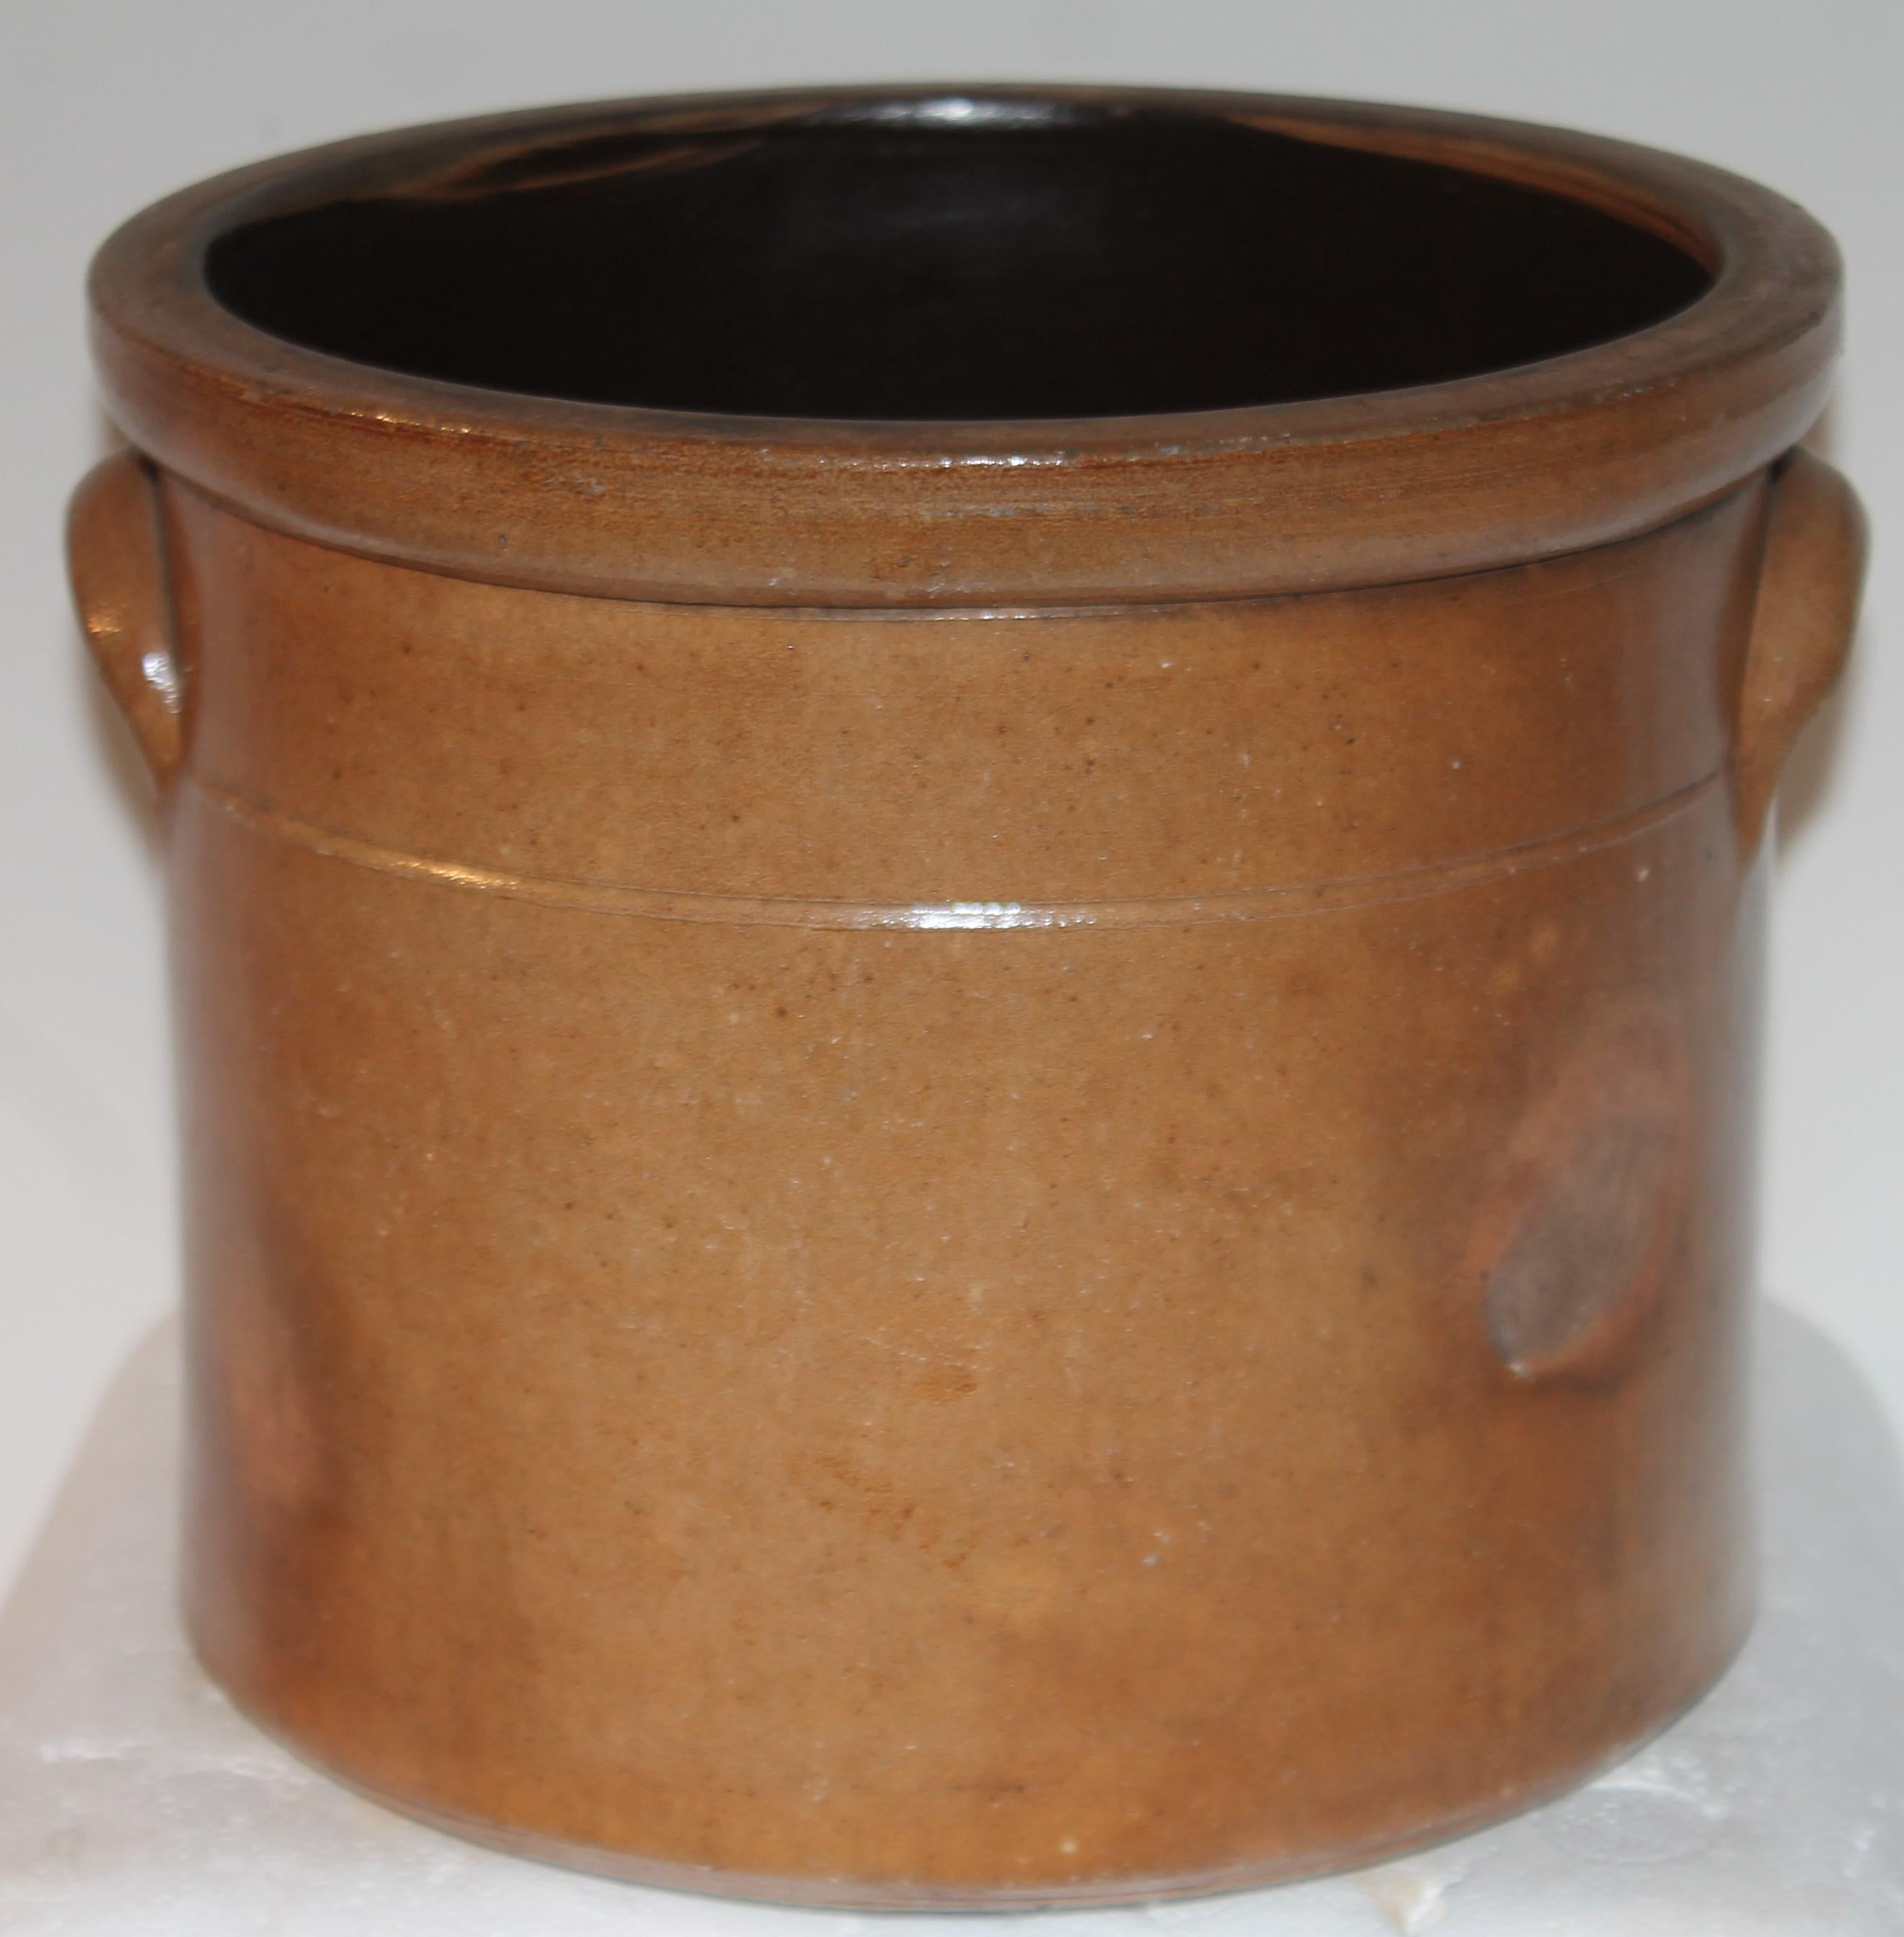 This amazing double handled 19thc Evan Jones ,Pittston ,Pennsylvania hand decorated stoneware crock is a one gallon and in mint condition. Most unusual brown glaze surface done in the firing.